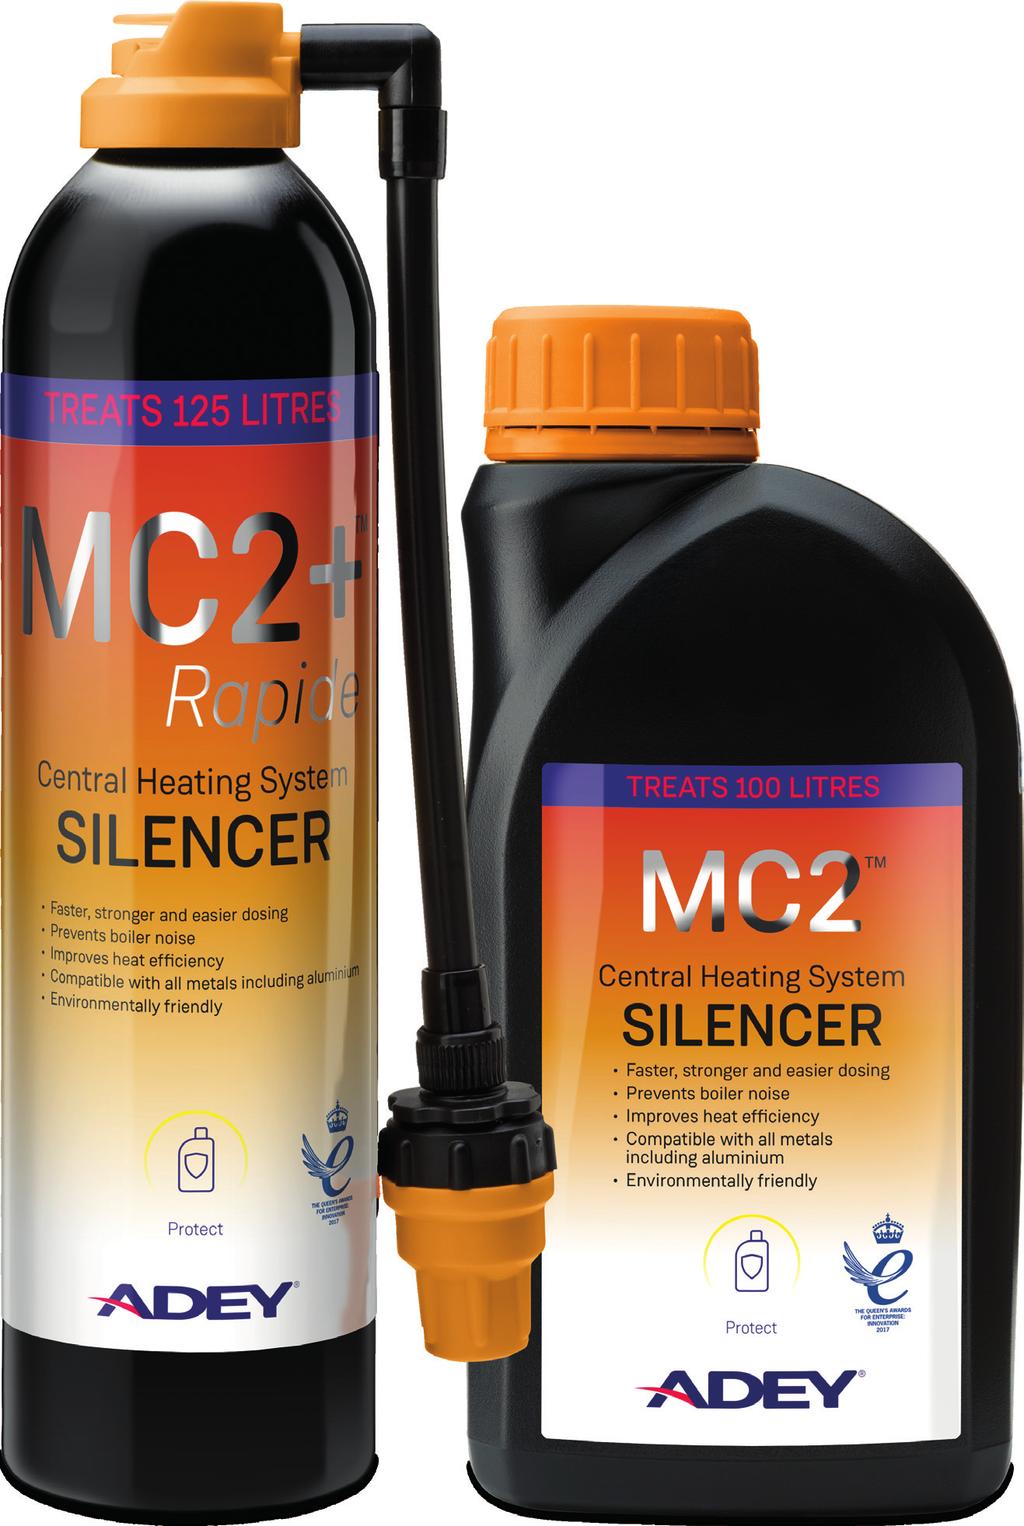 Central Heating System SILENCER MC2+ Silencer effectively reduces boiler noise and restores heat efficiency.